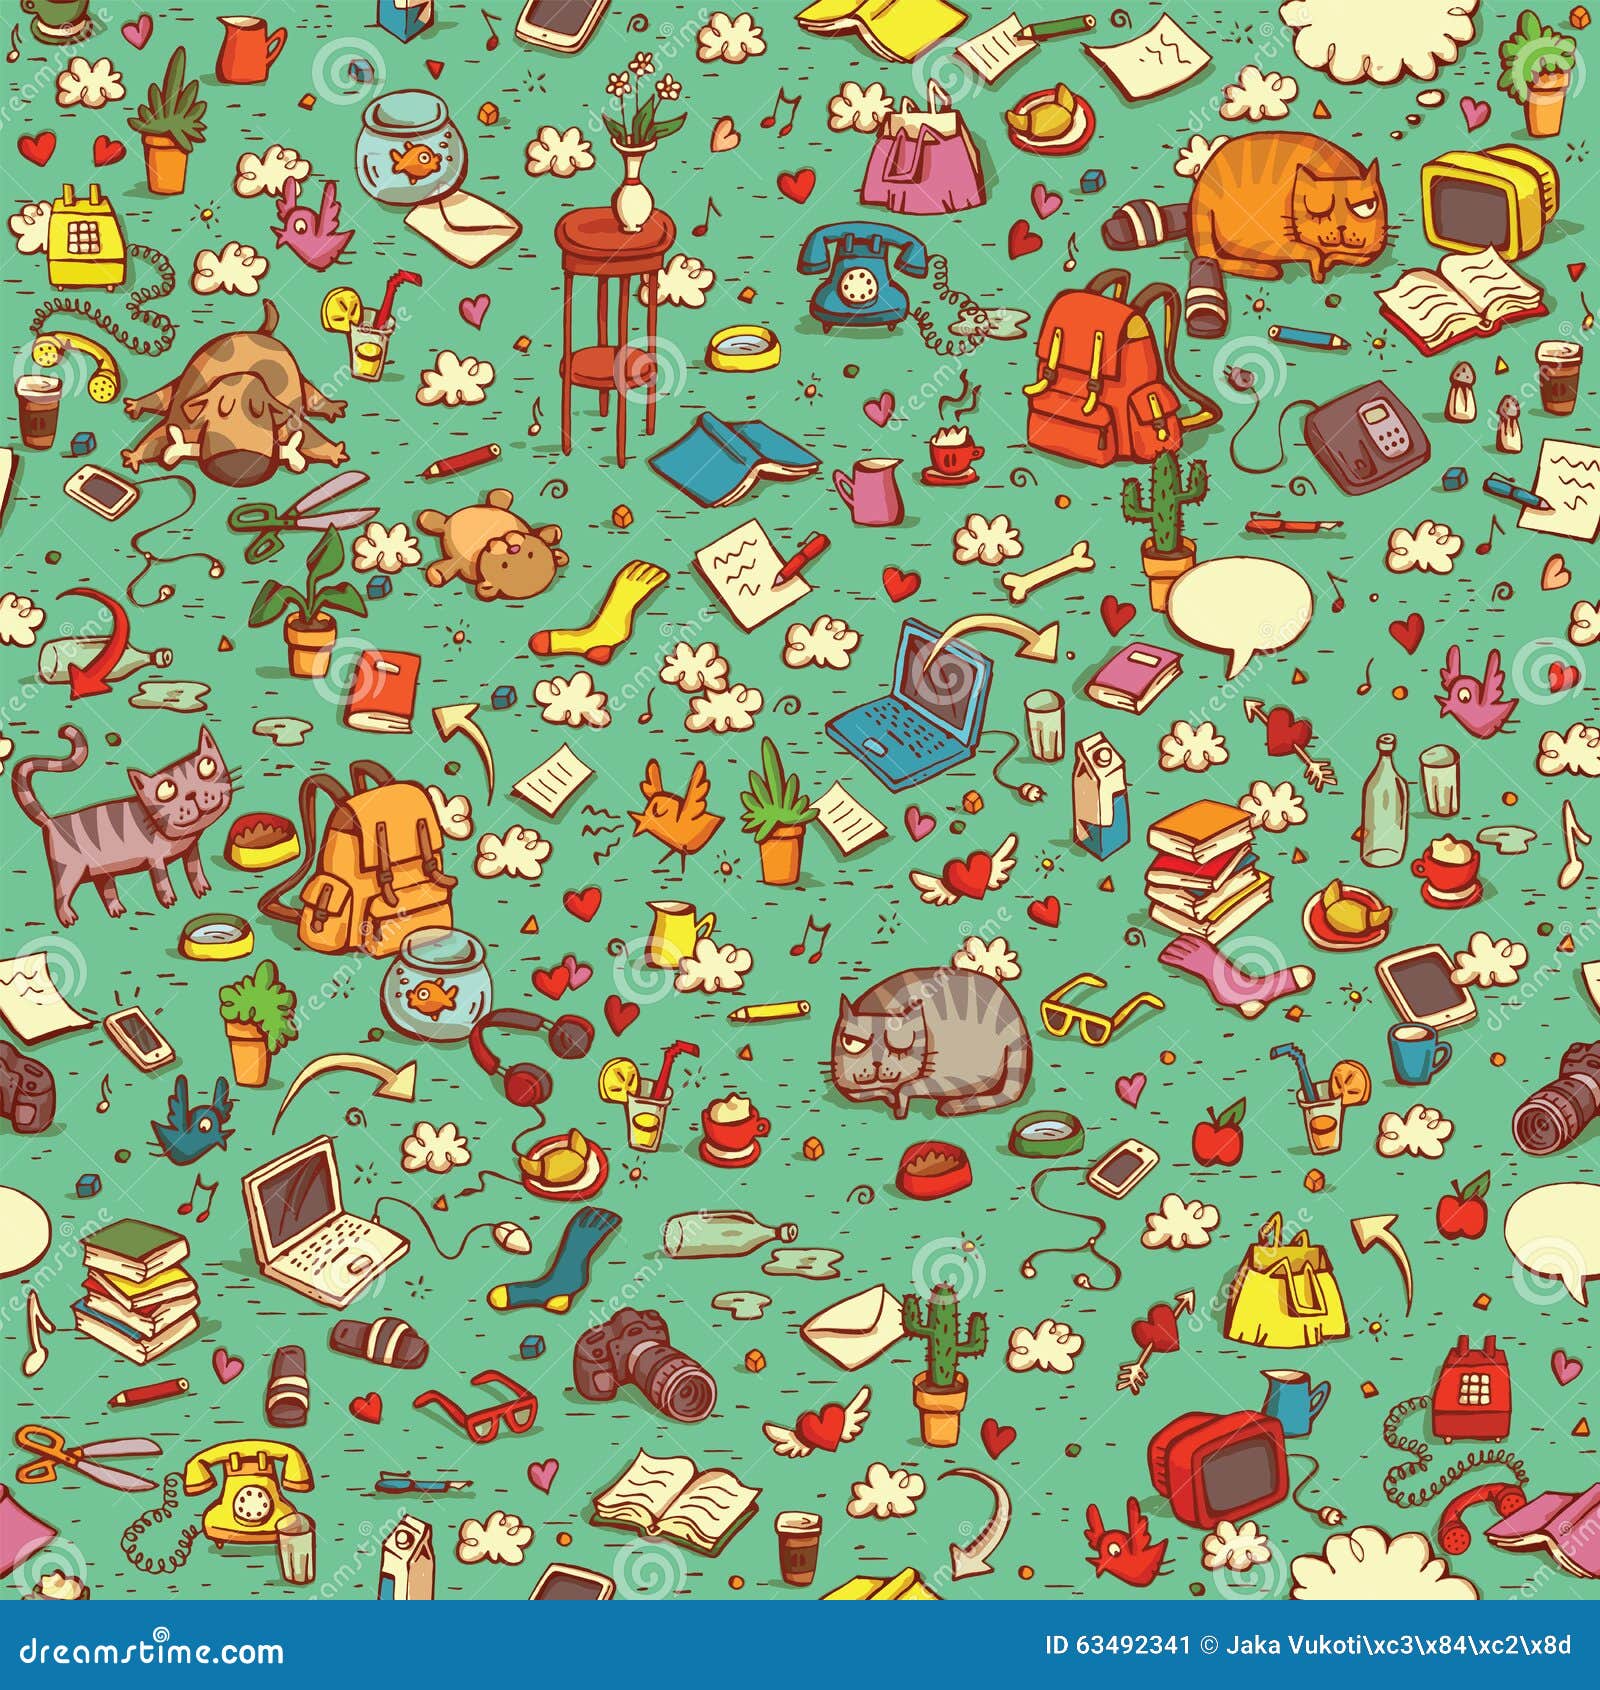 technological everyday objects seamless pattern in colors